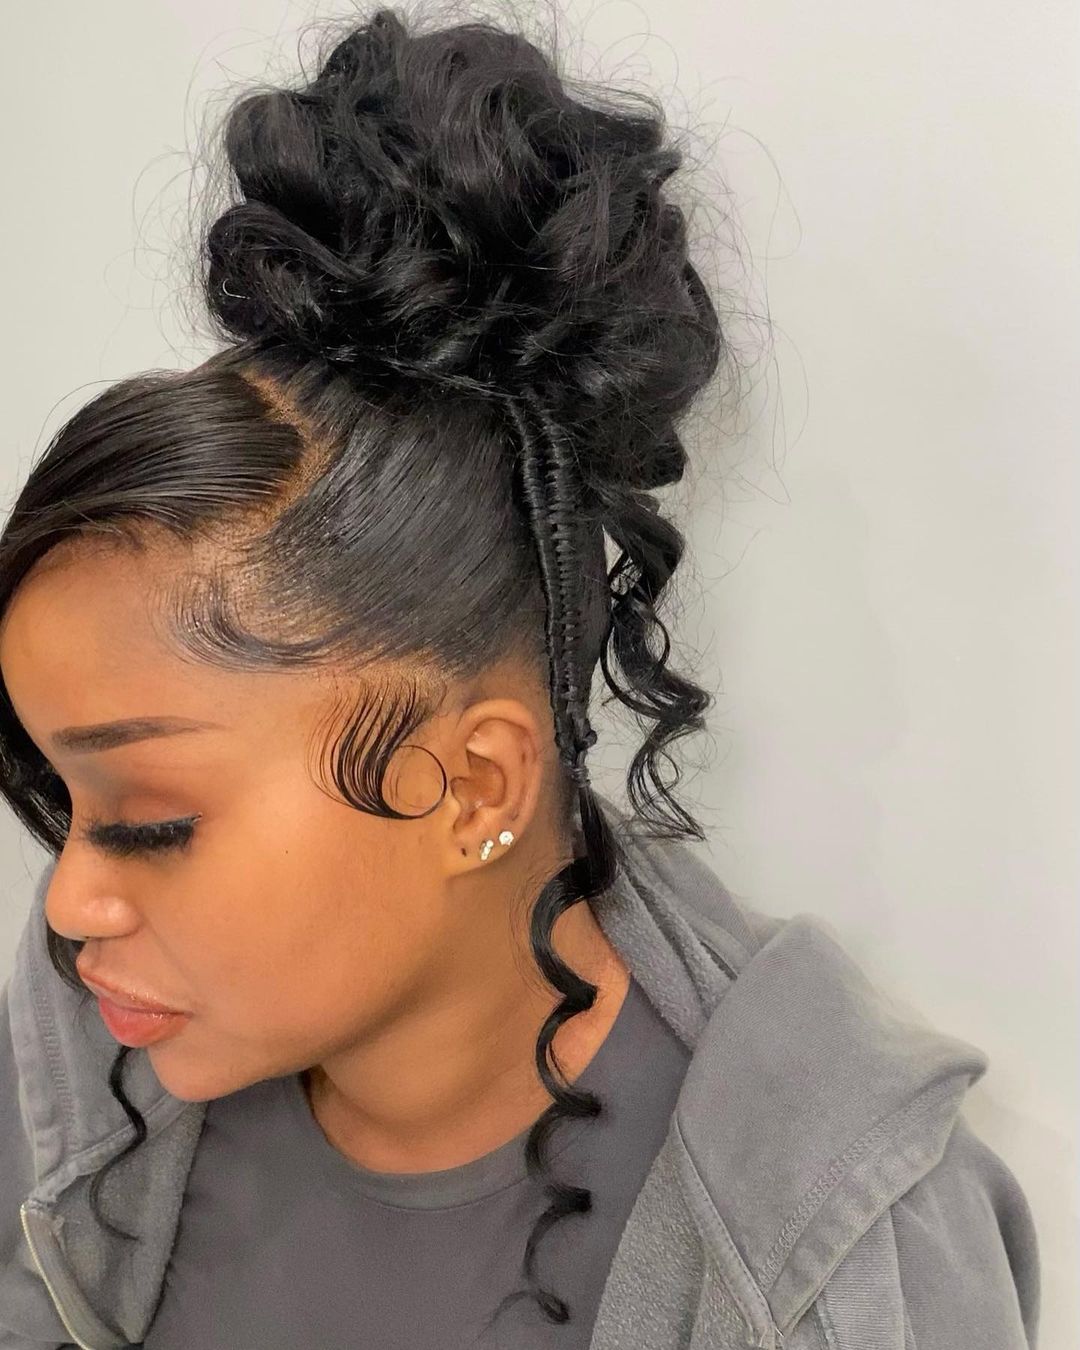 Updo Hairstyle for Black women 23 Black hair updo styles pictures | Black updo hairstyles with curls | black woman braids Updo Hairstyles for Black Women